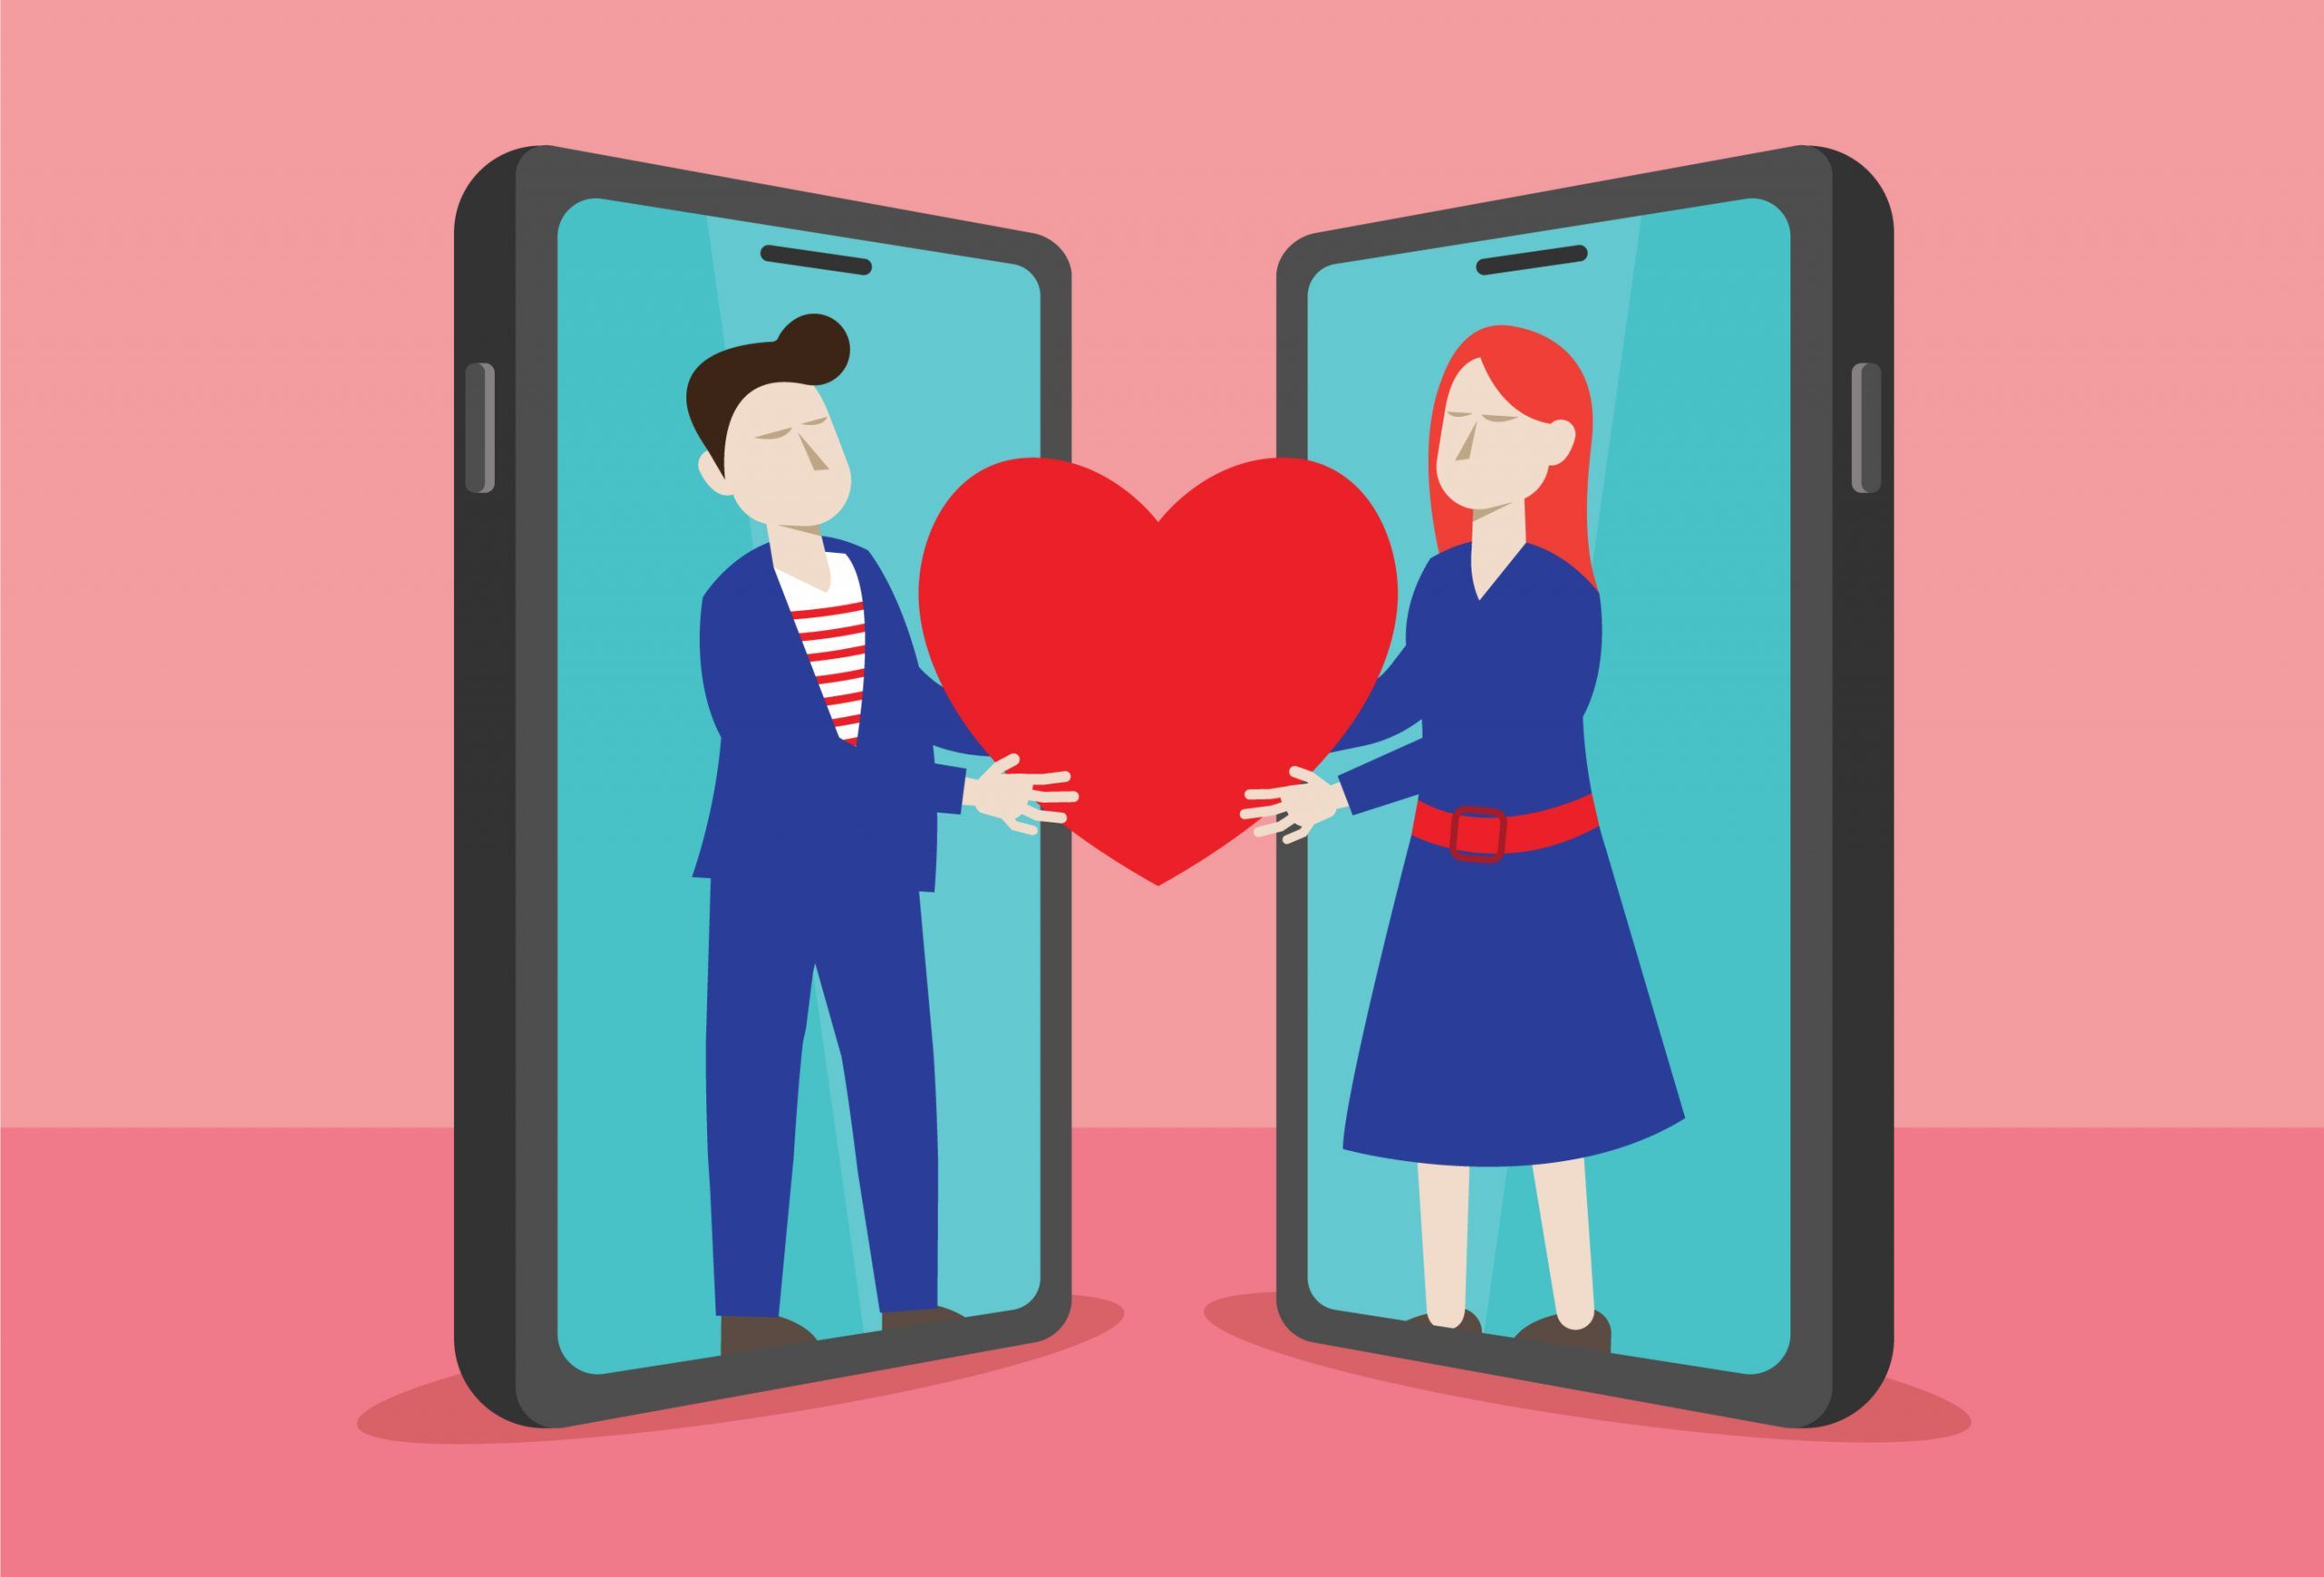 Online dating is helping people be creative during social distancing. Stock/Getty